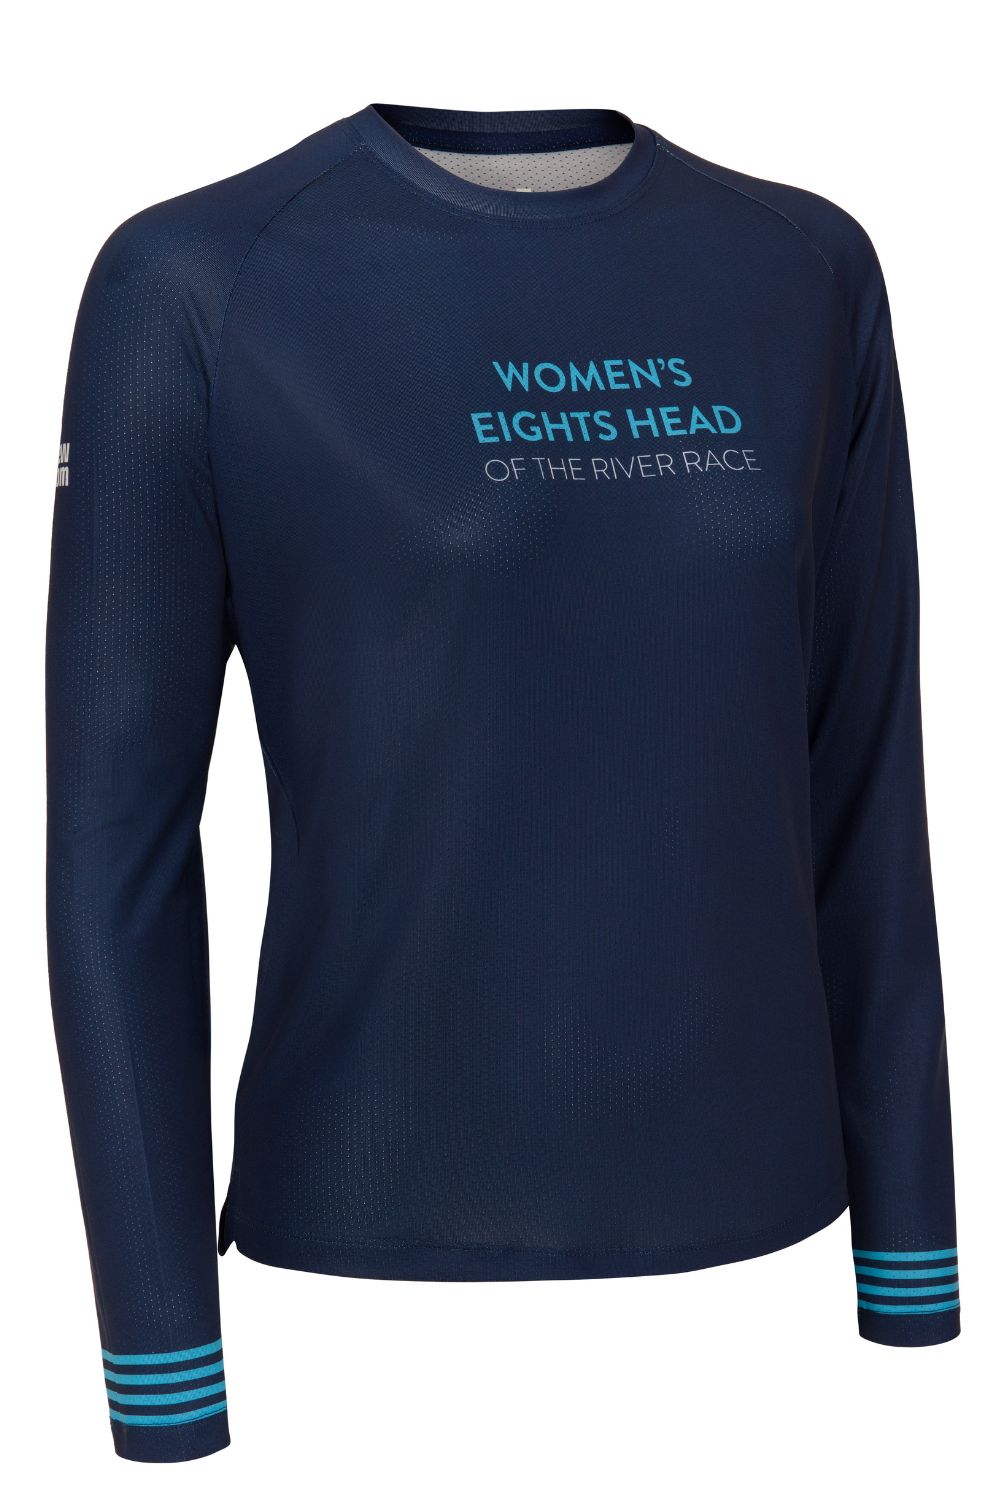 The WEHORR Carbonised Bamboo Top (Women's)